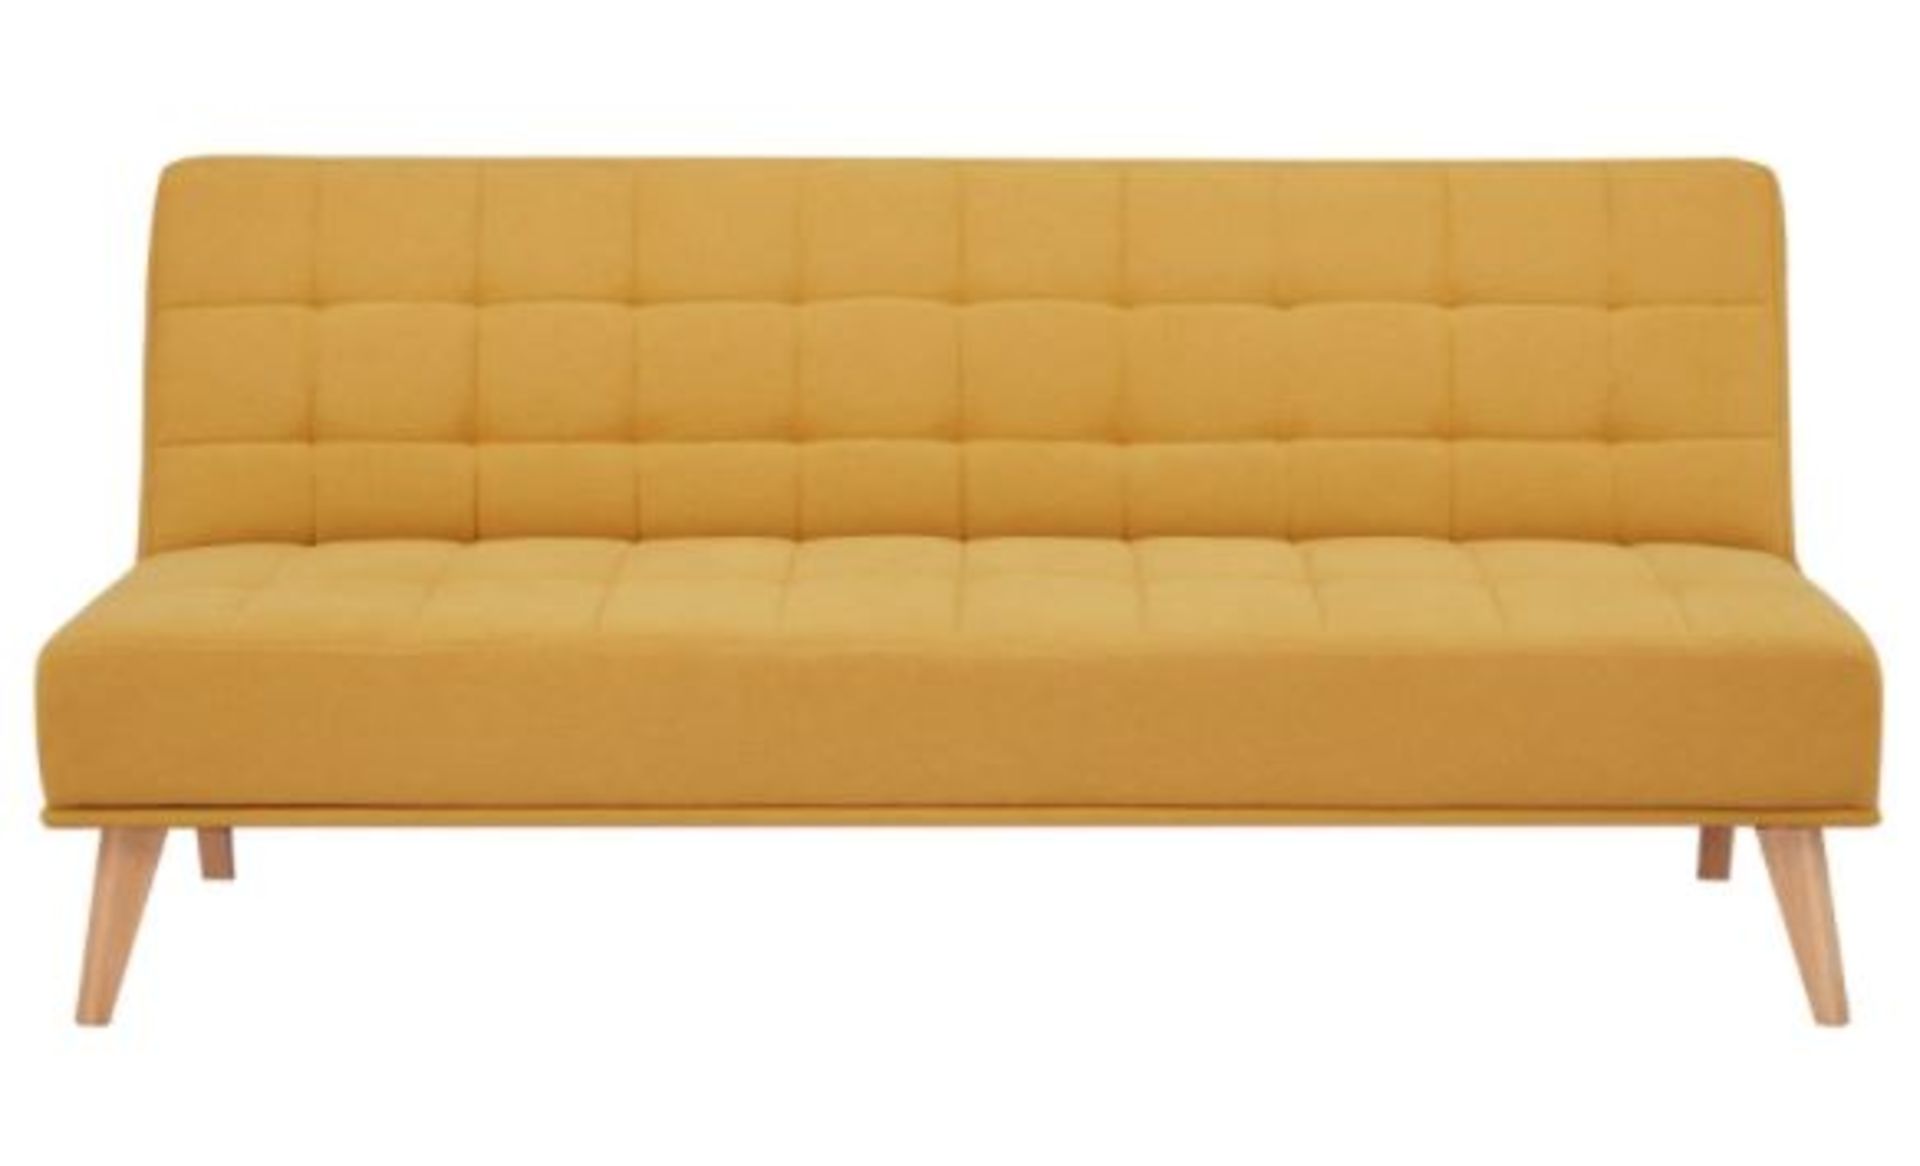 (R6H) Household. 1 X Clik Clak Kelly Sofa Bed Ochre. Wooden Frame With Solid Birchwood Legs. 100% P - Image 3 of 10